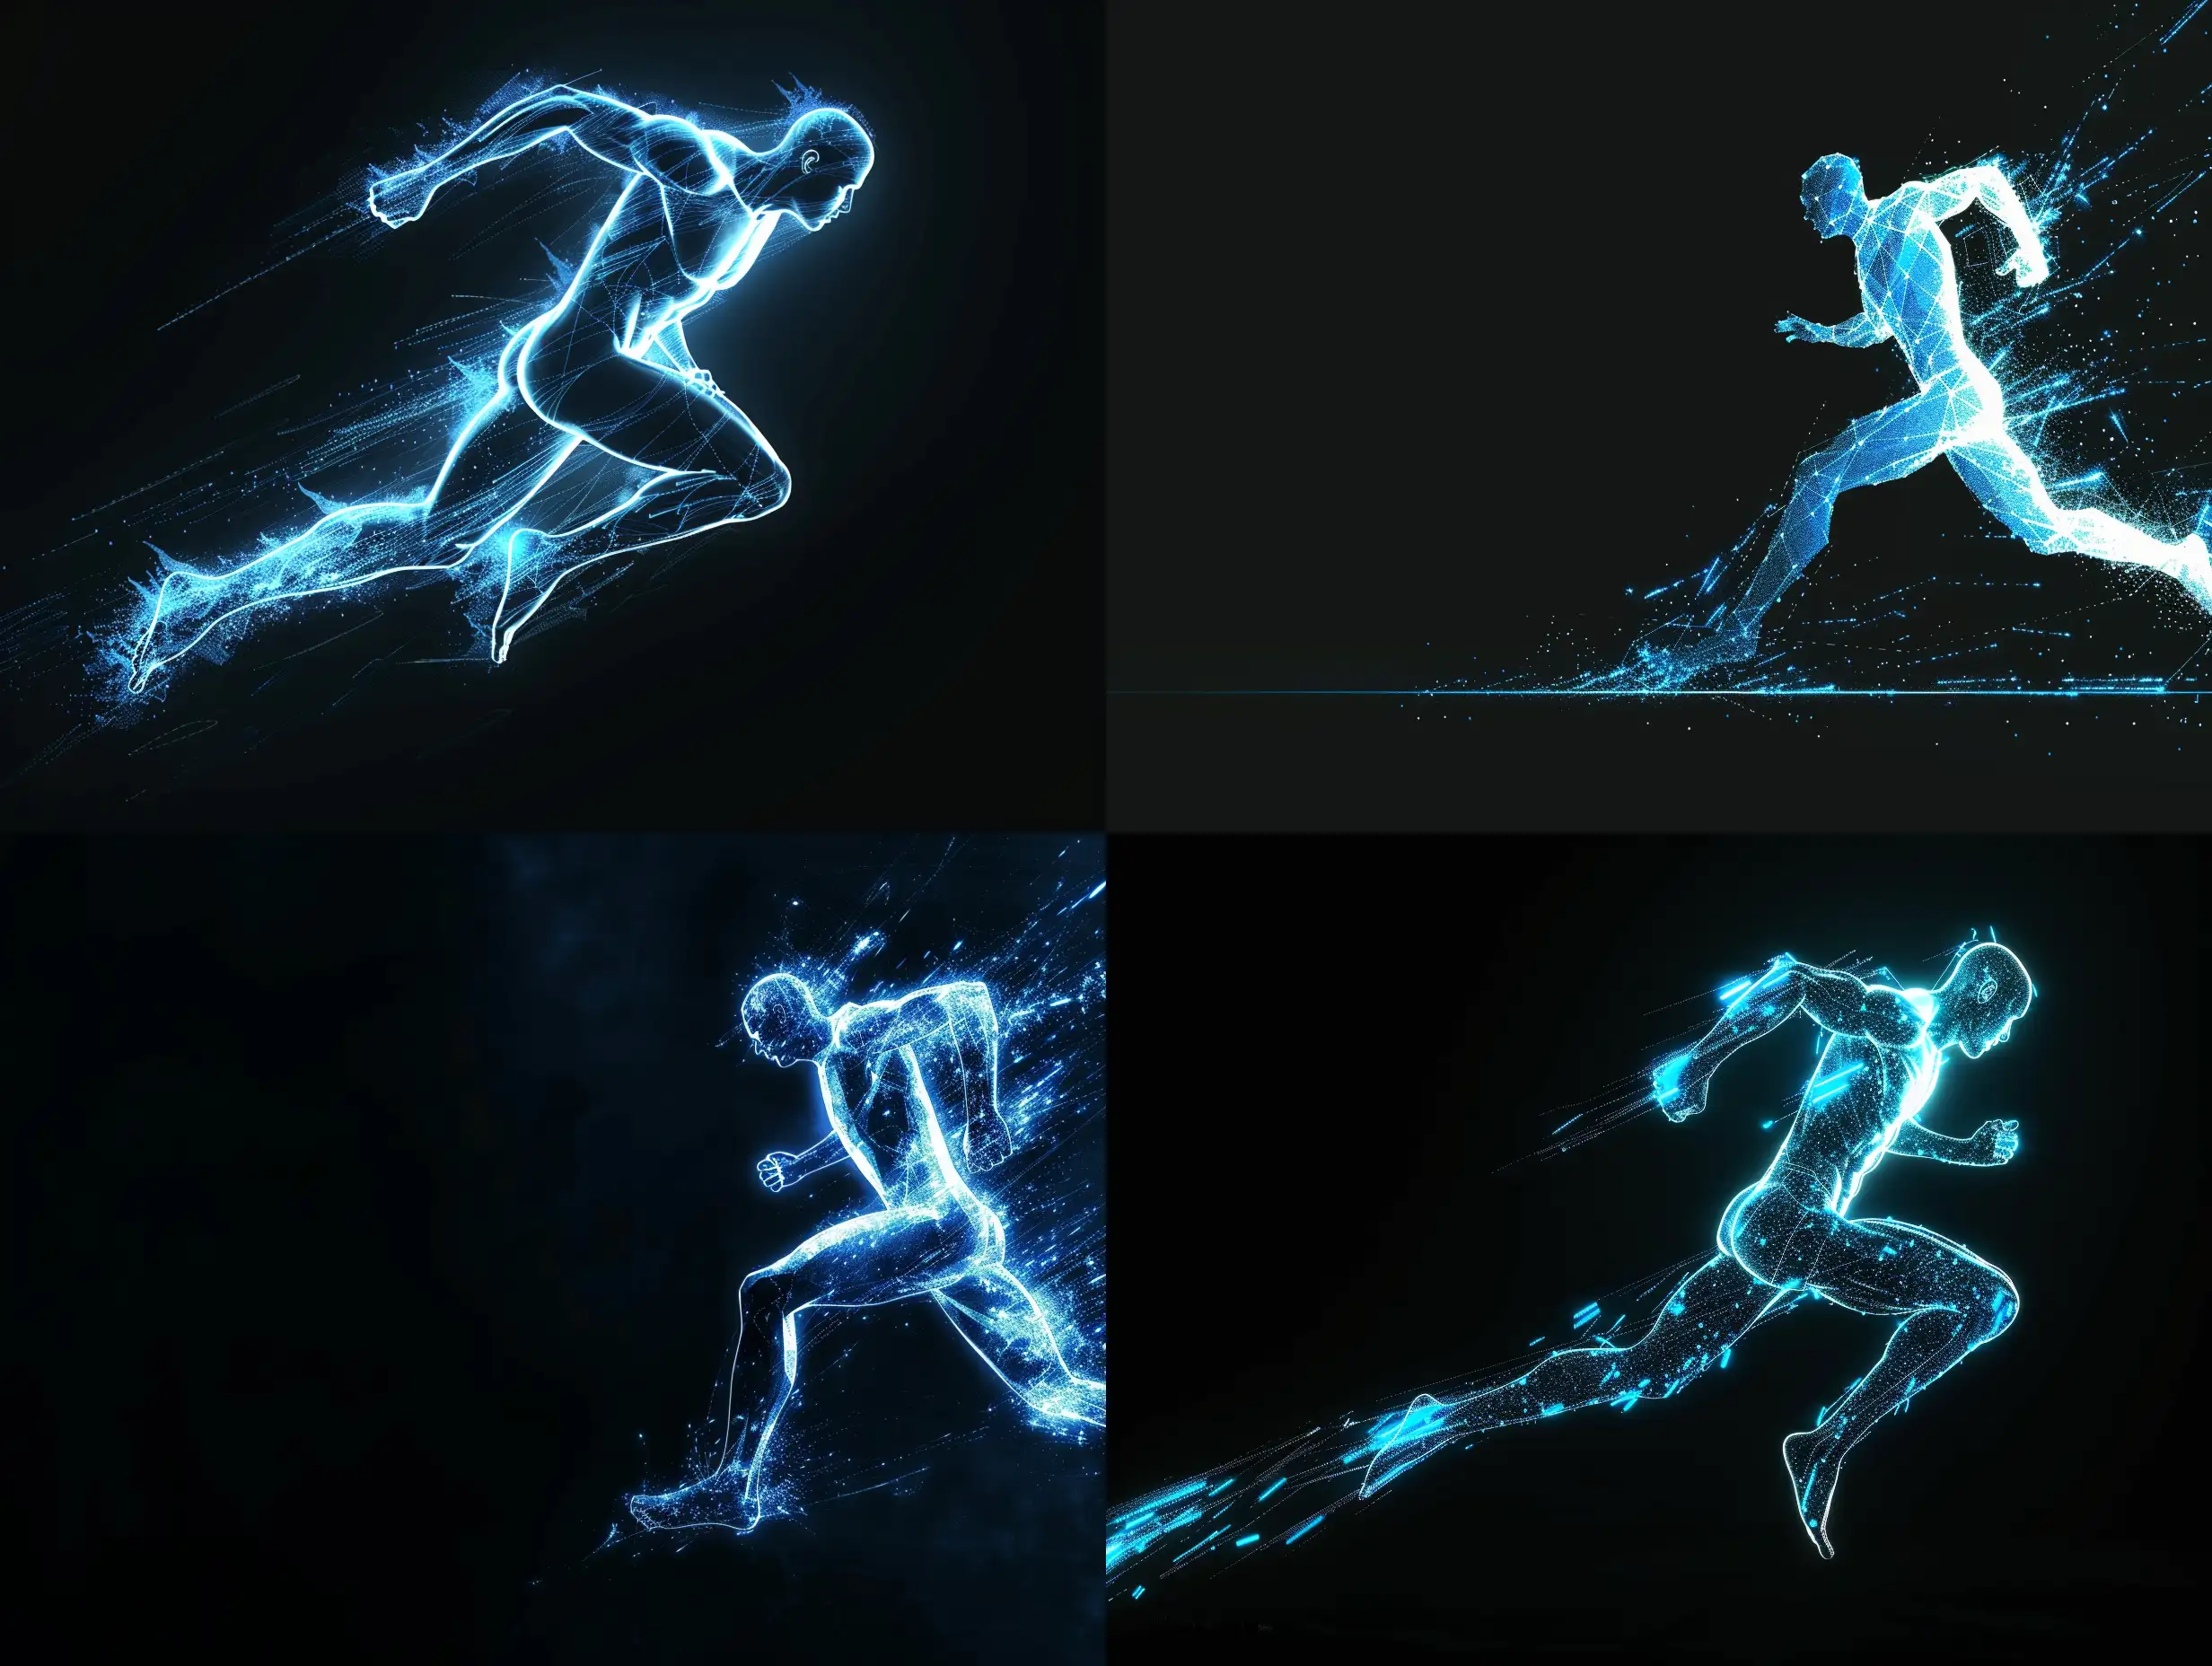 Dynamic-Blue-Silhouette-of-a-Running-Human-Against-Black-Background